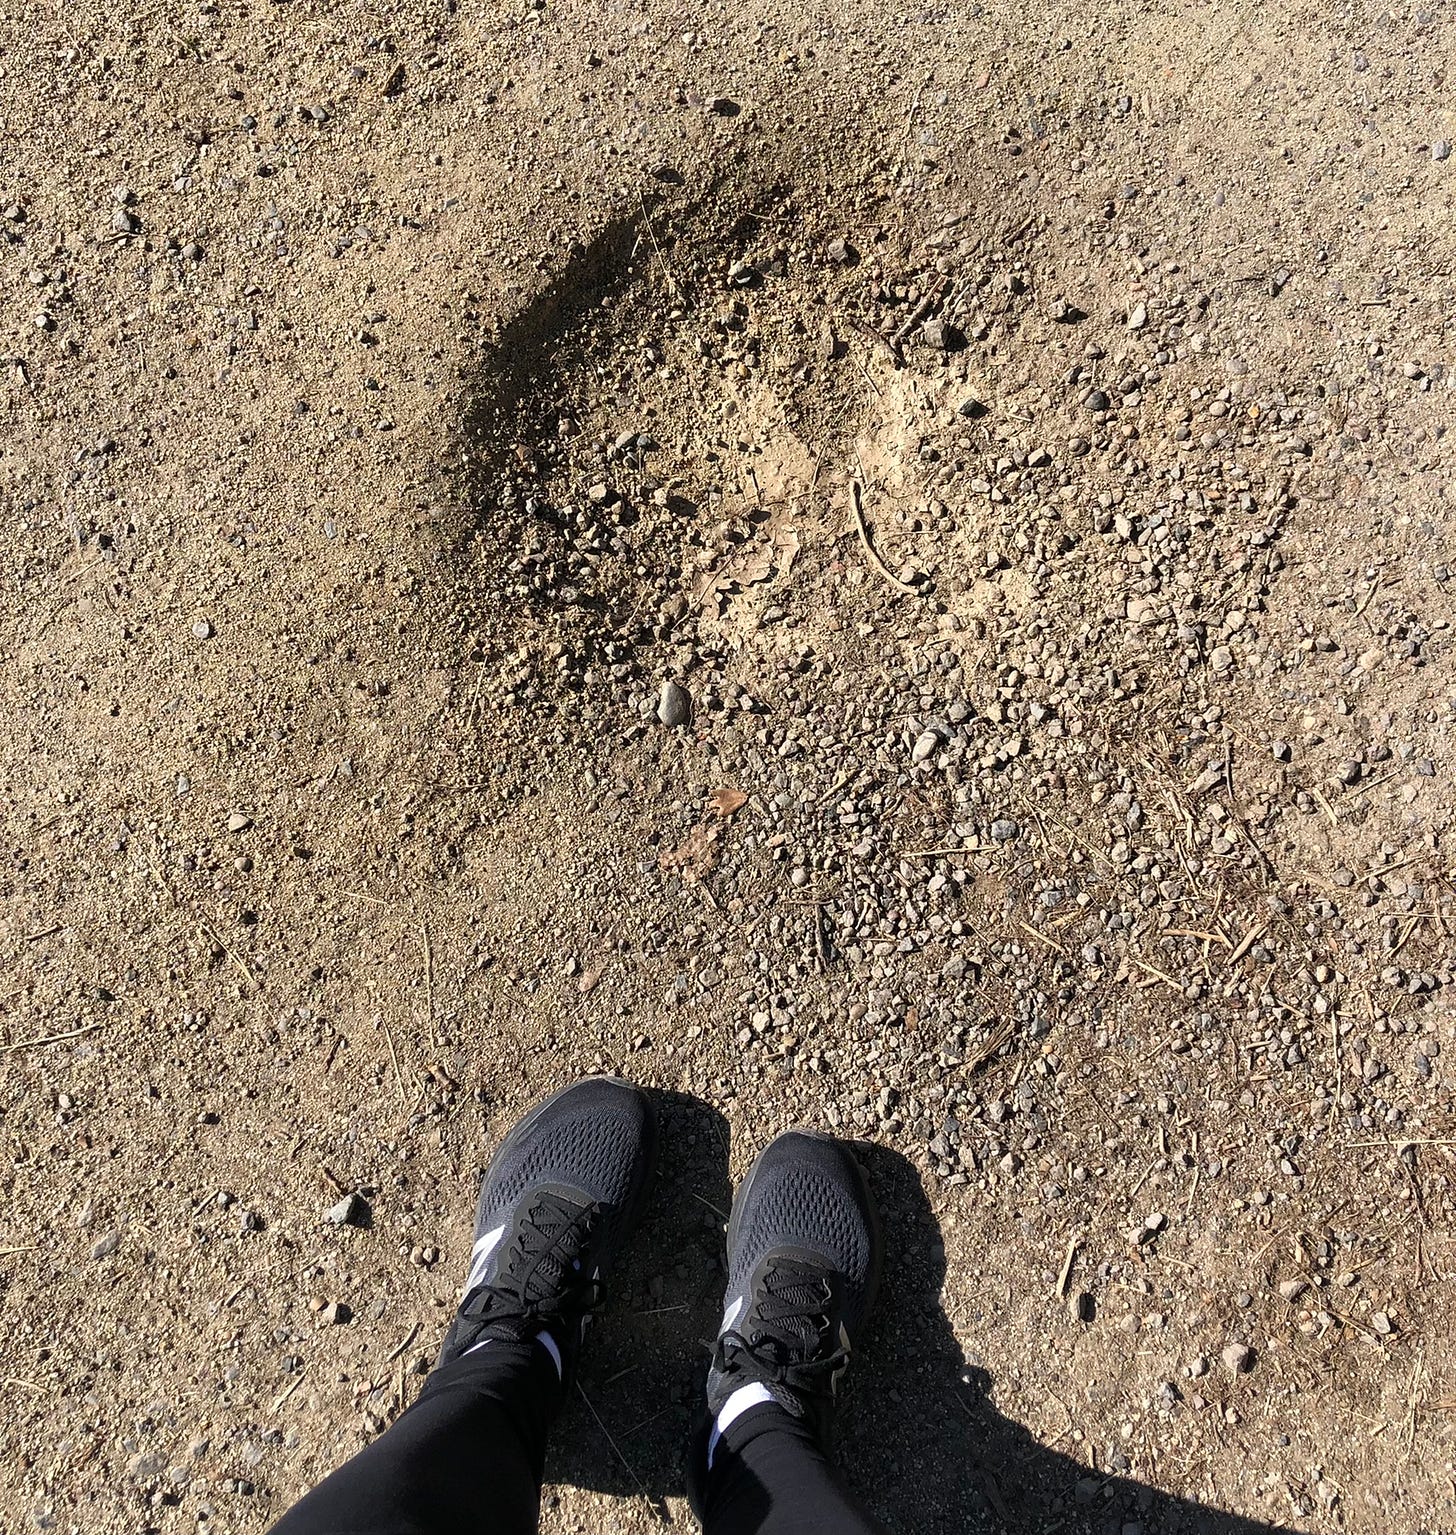 a view of the ground, which is dirt with a circular divot in it, with a pair of black sneaker-wearing feet in view